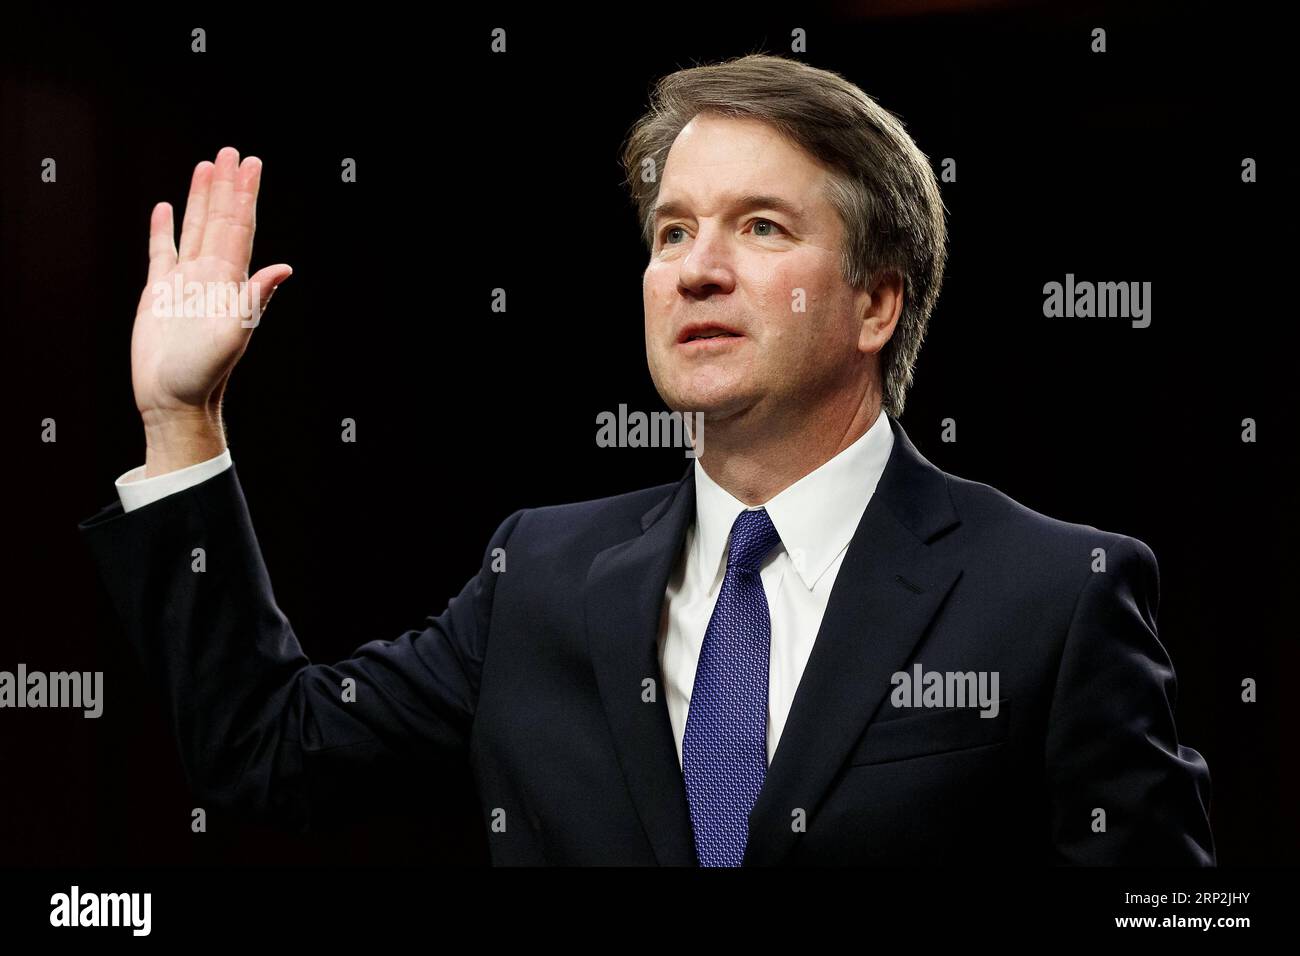 (180905) -- WASHINGTON, Sept. 5, 2018 -- U.S. Supreme Court nominee Judge Brett Kavanaugh swears in during his Senate confirmation hearing on Capitol Hill in Washington D.C., the United States, Sept. 4, 2018. The Senate confirmation hearing for Kavanaugh began Tuesday, which has descended into chaos as Democrats protested about Republicans blocking access to documents concerning the judge. ) (jmmn) U.S.-WASHINGTON D.C.-BRETT KAVANAUGH-HEARING TingxShen PUBLICATIONxNOTxINxCHN Stock Photo